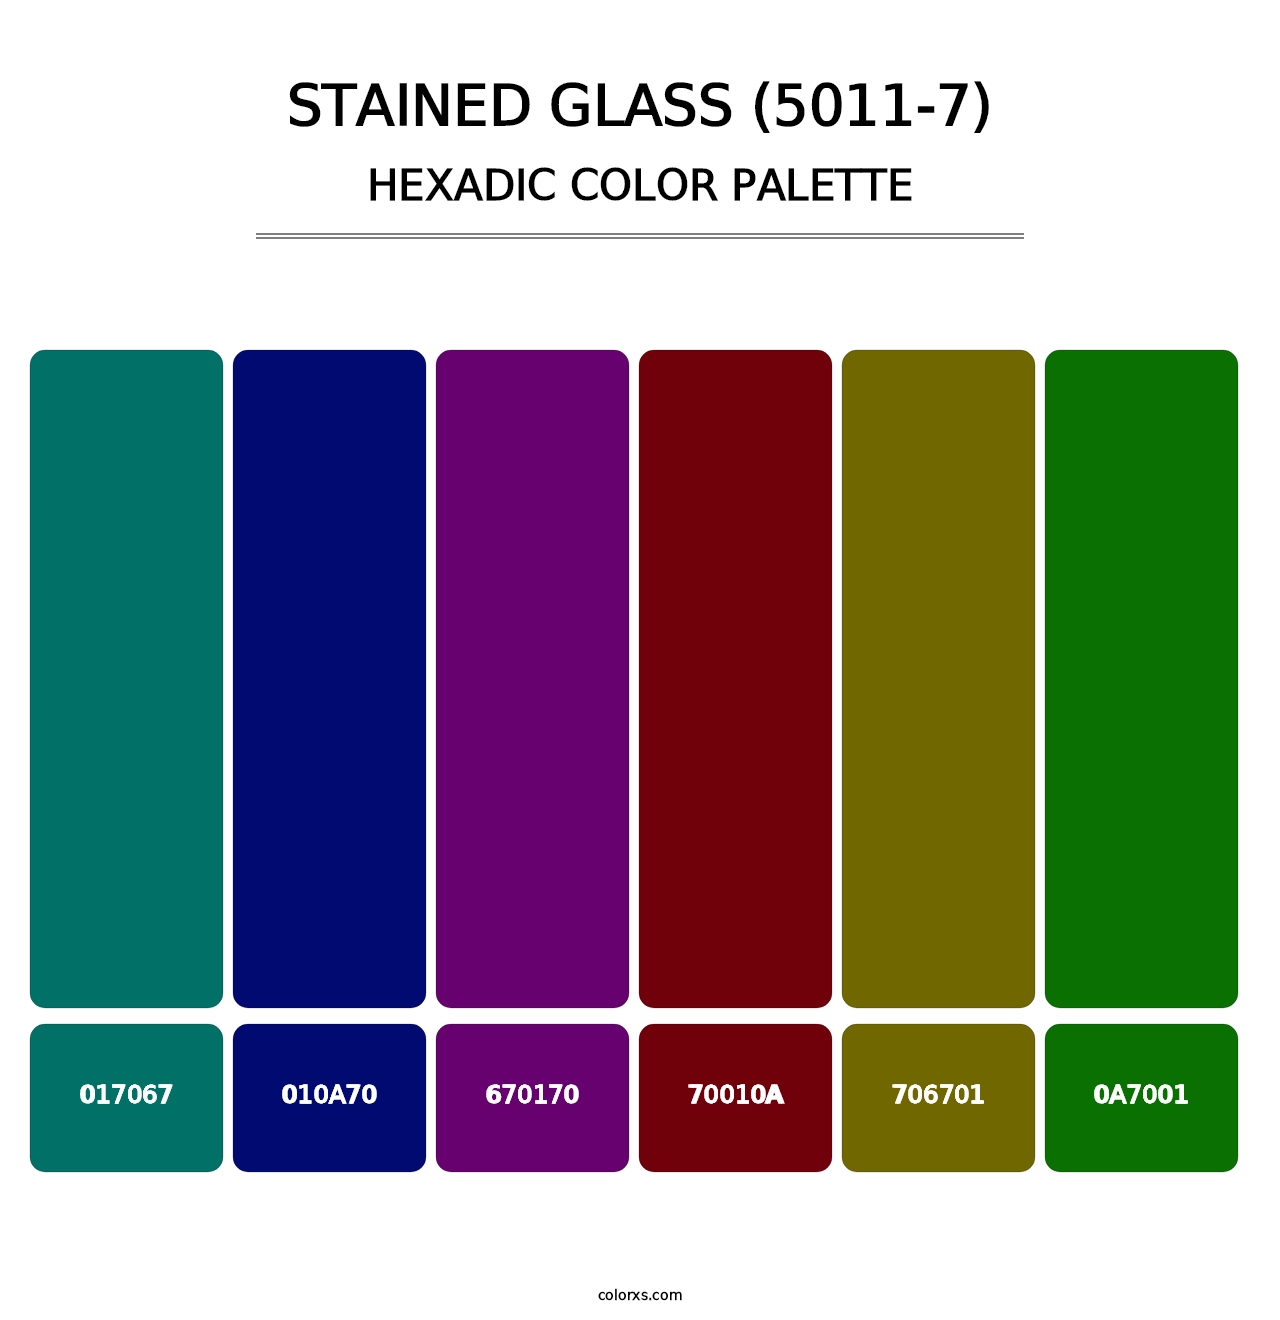 Stained Glass (5011-7) - Hexadic Color Palette